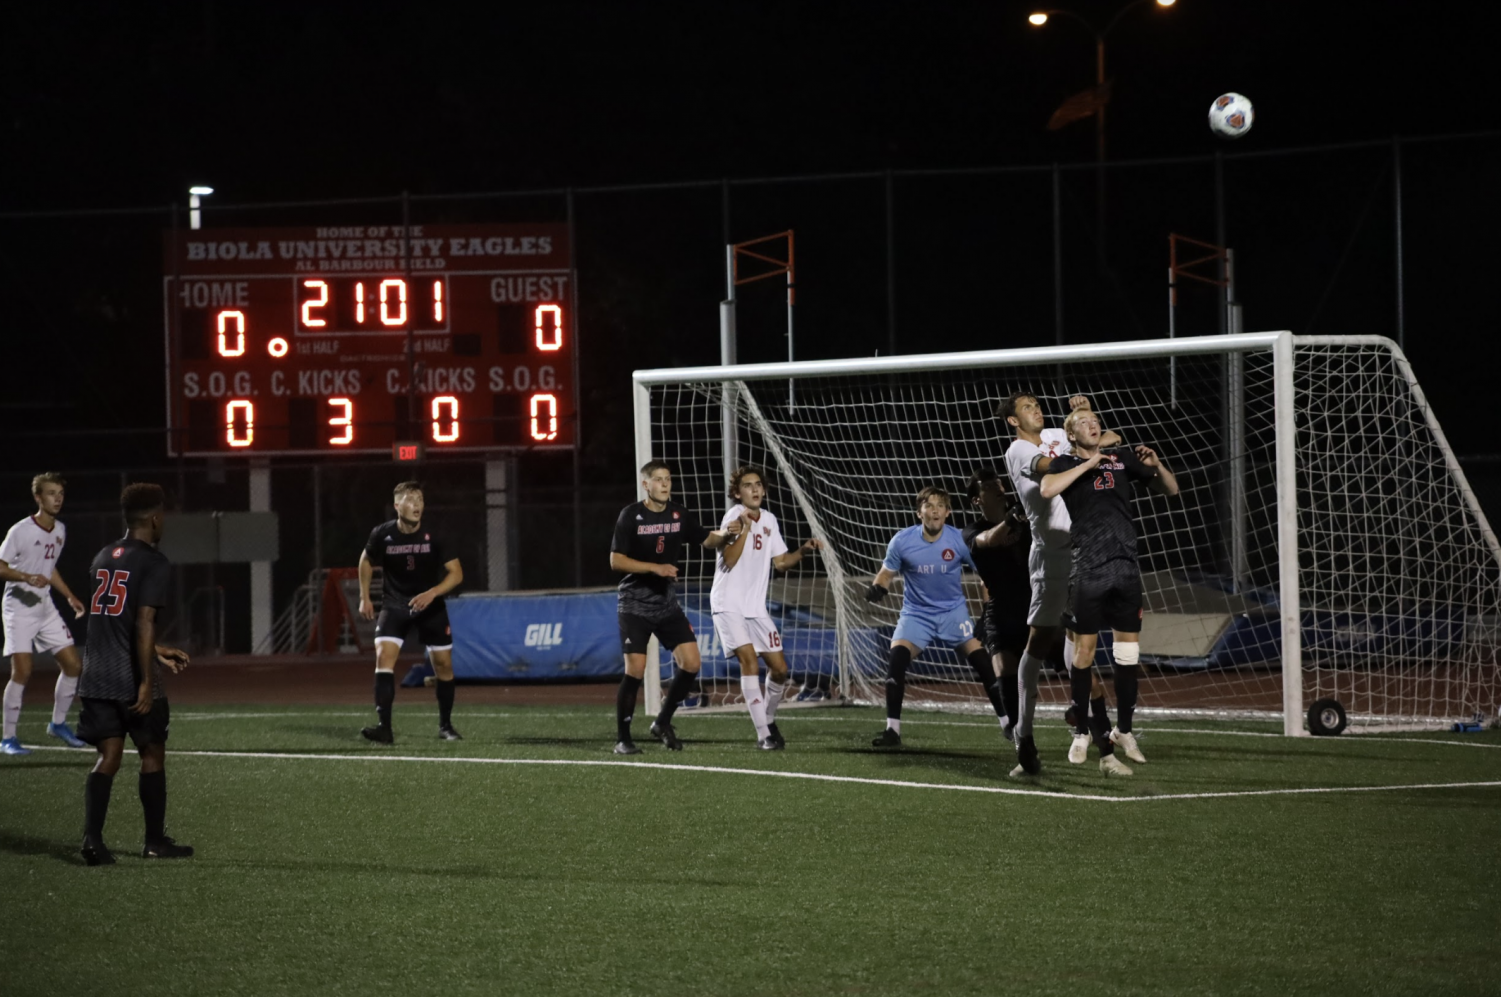 The Biola mens soccer team tries to get the ball into the net after a corner kick.  